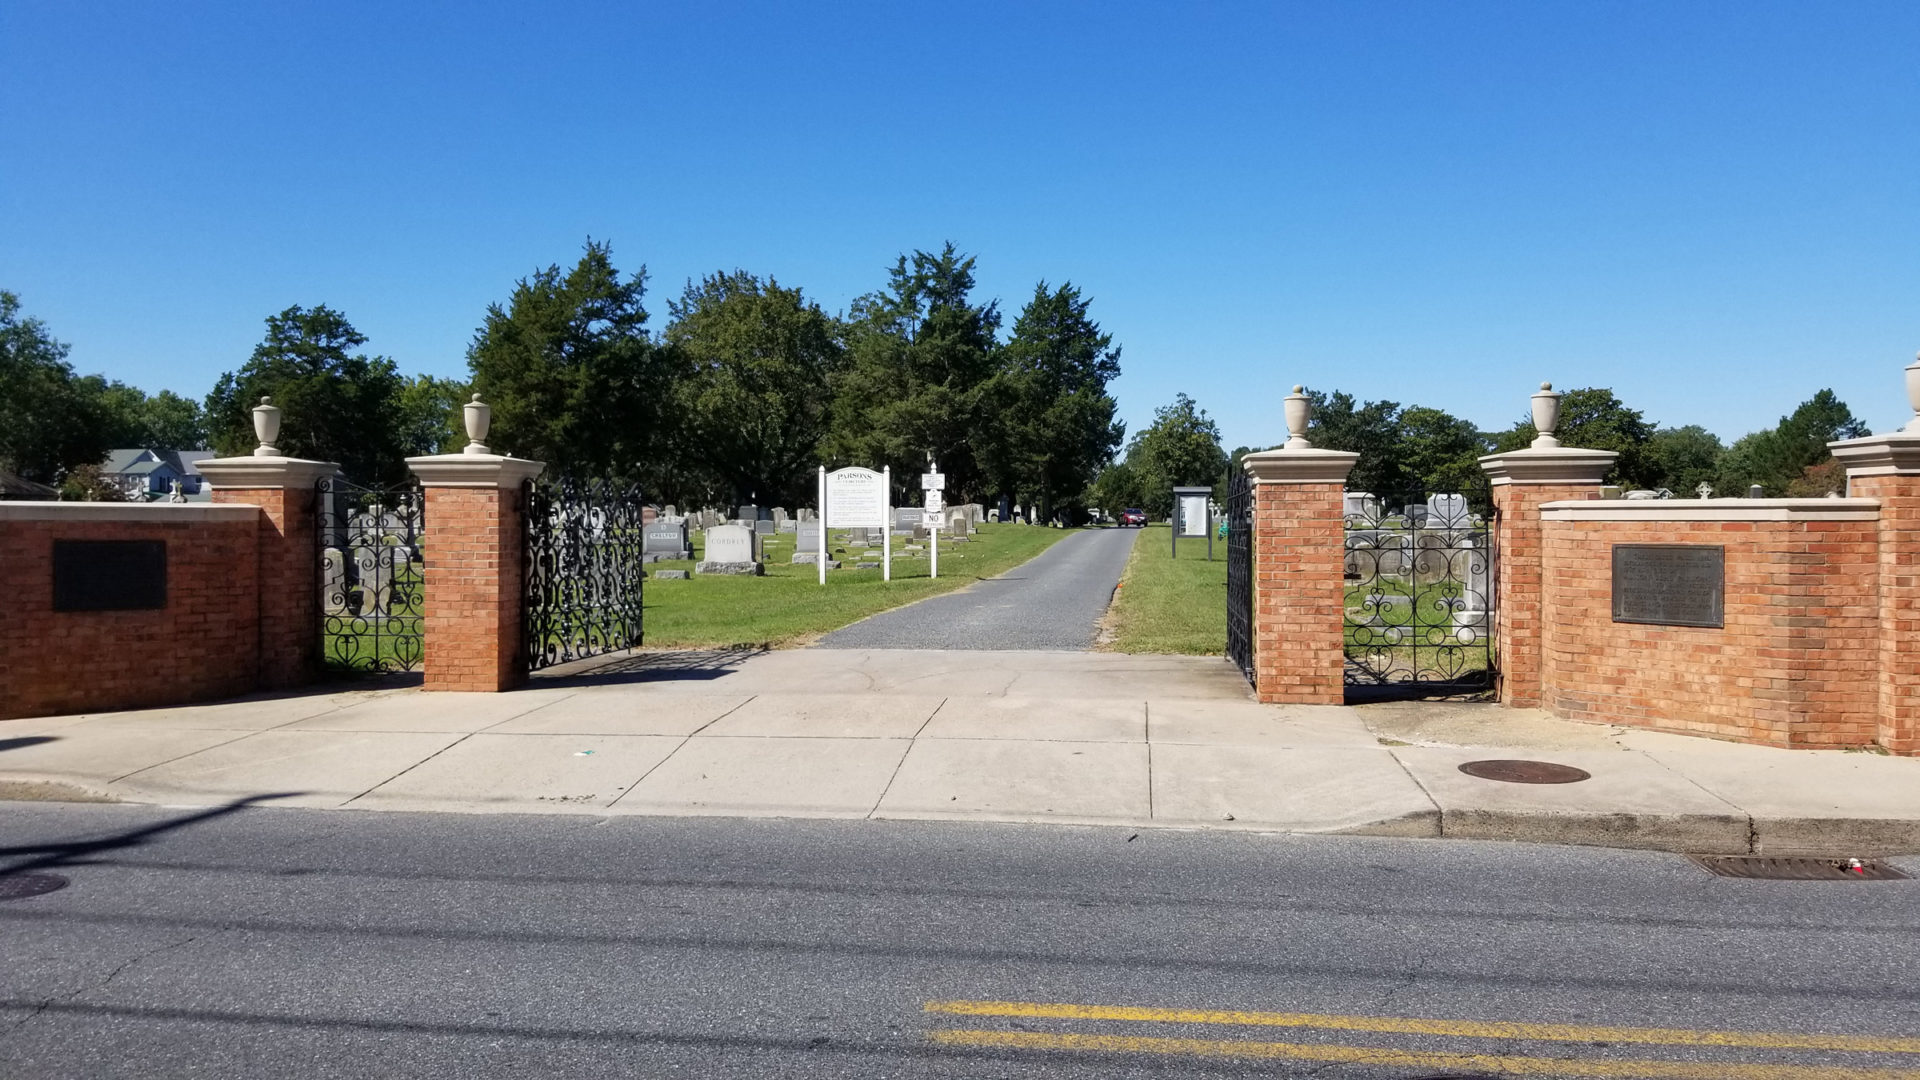 Gated entrance to the Parsons Cemetery